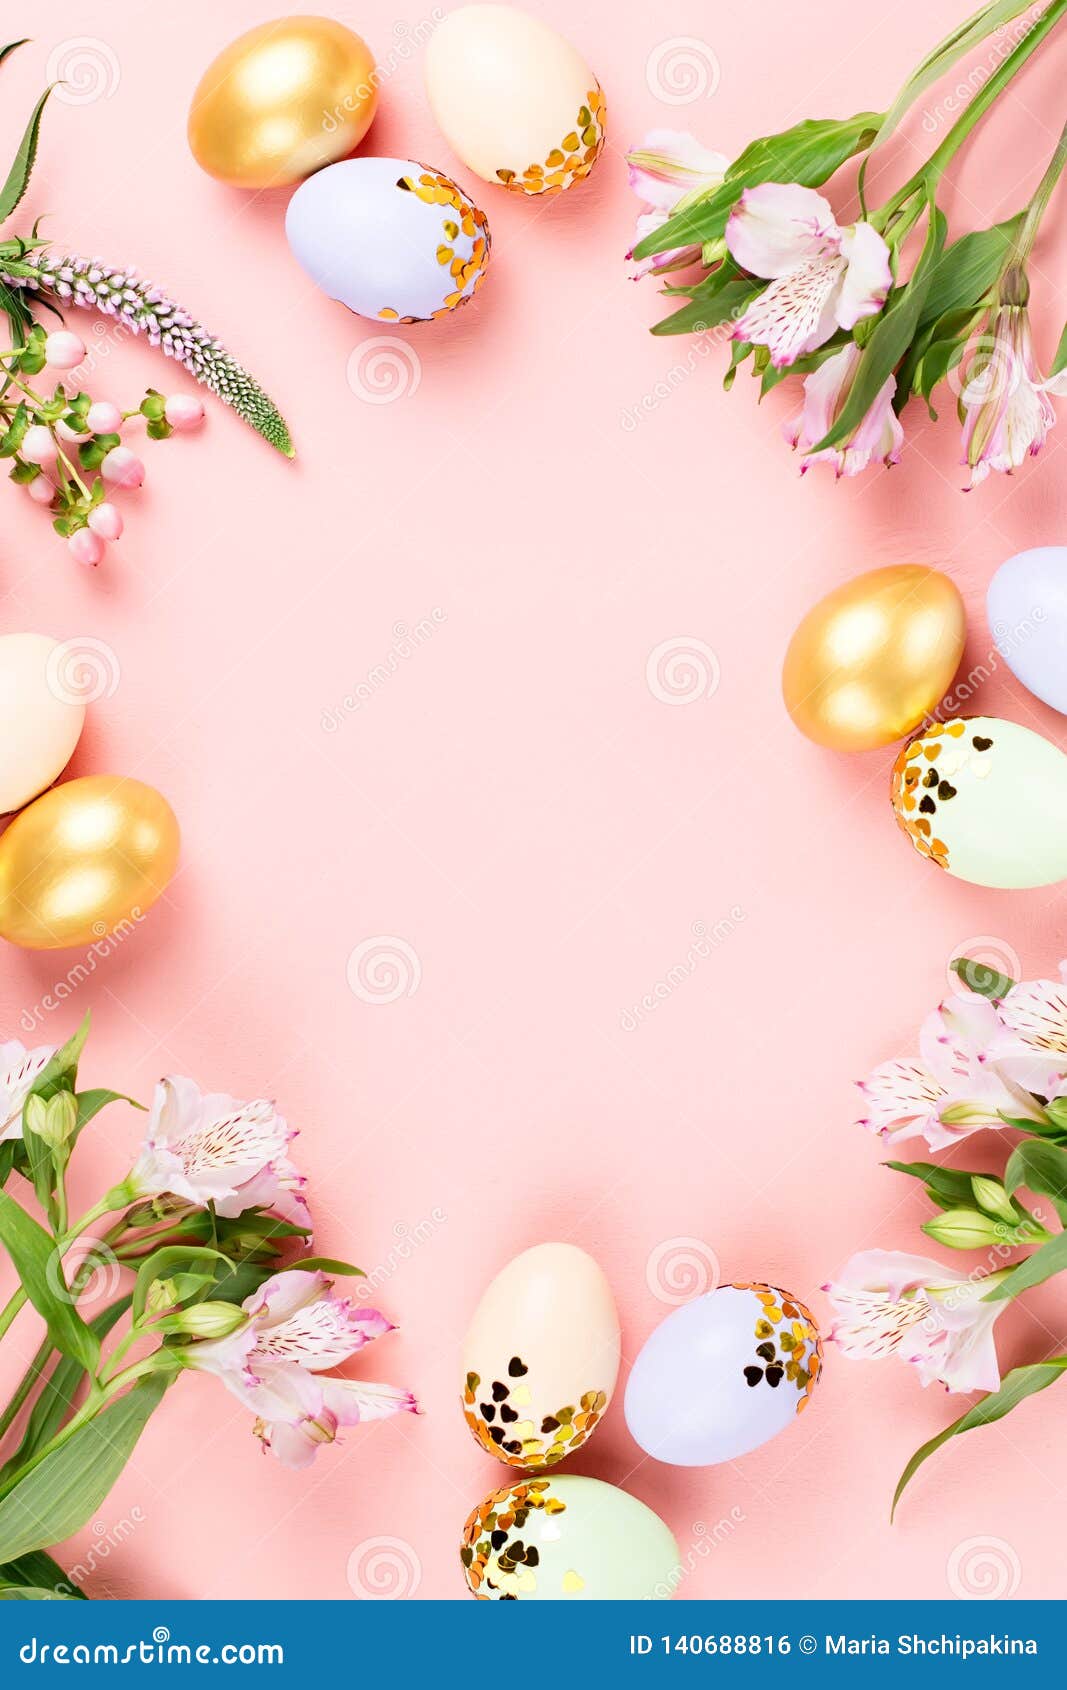 Festive Happy Easter Background with Decorated Eggs, Flowers ...